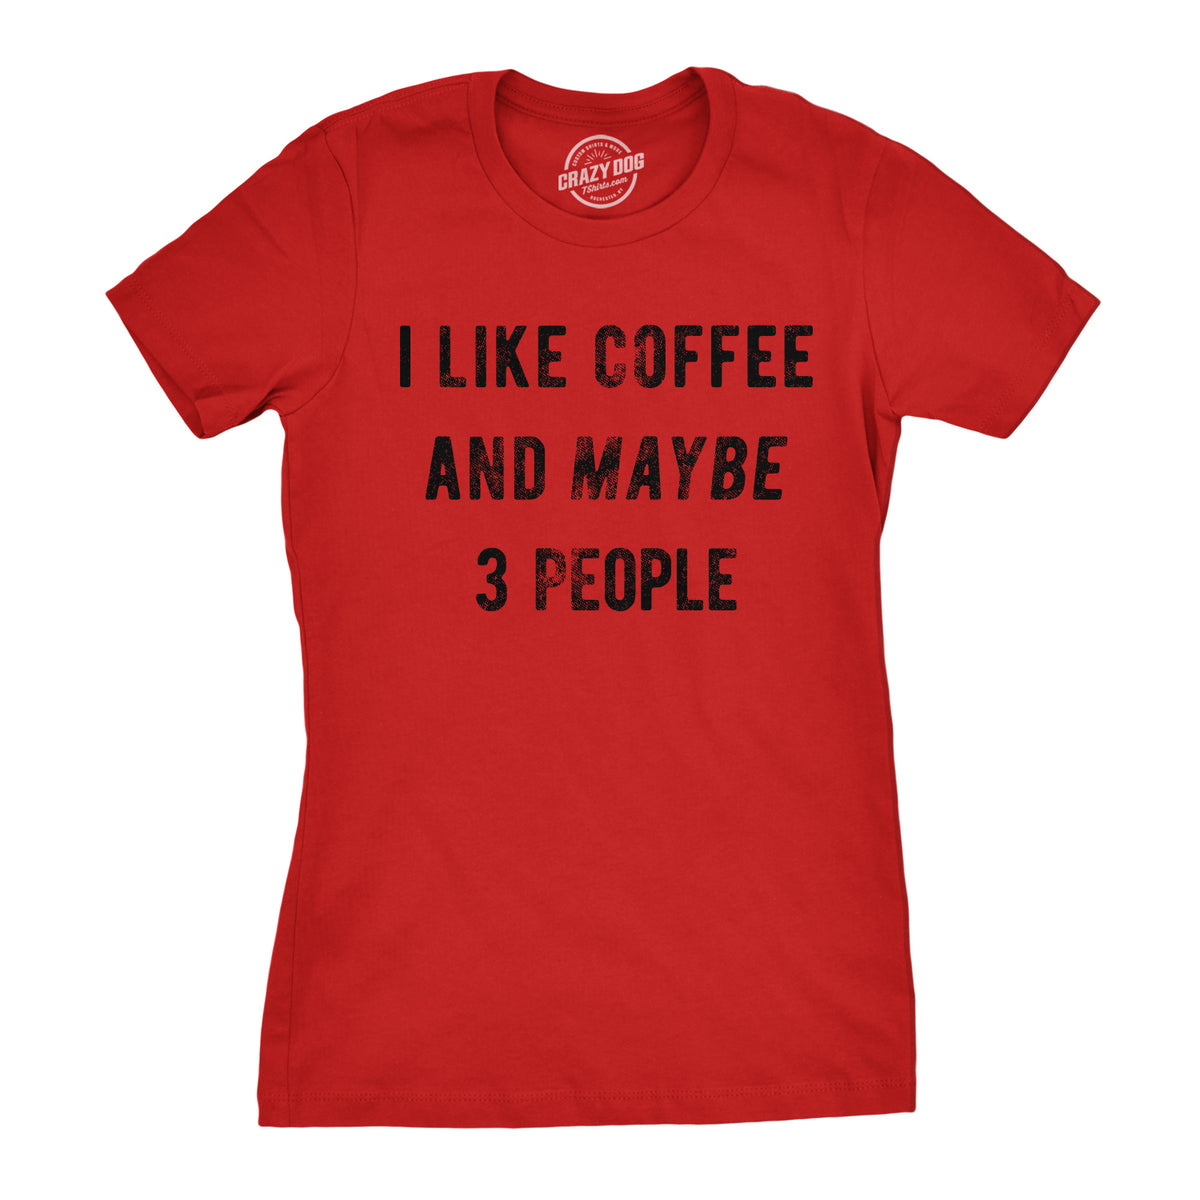 Funny Red I Like Coffee And Maybe 3 People Womens T Shirt Nerdy Coffee Introvert Tee